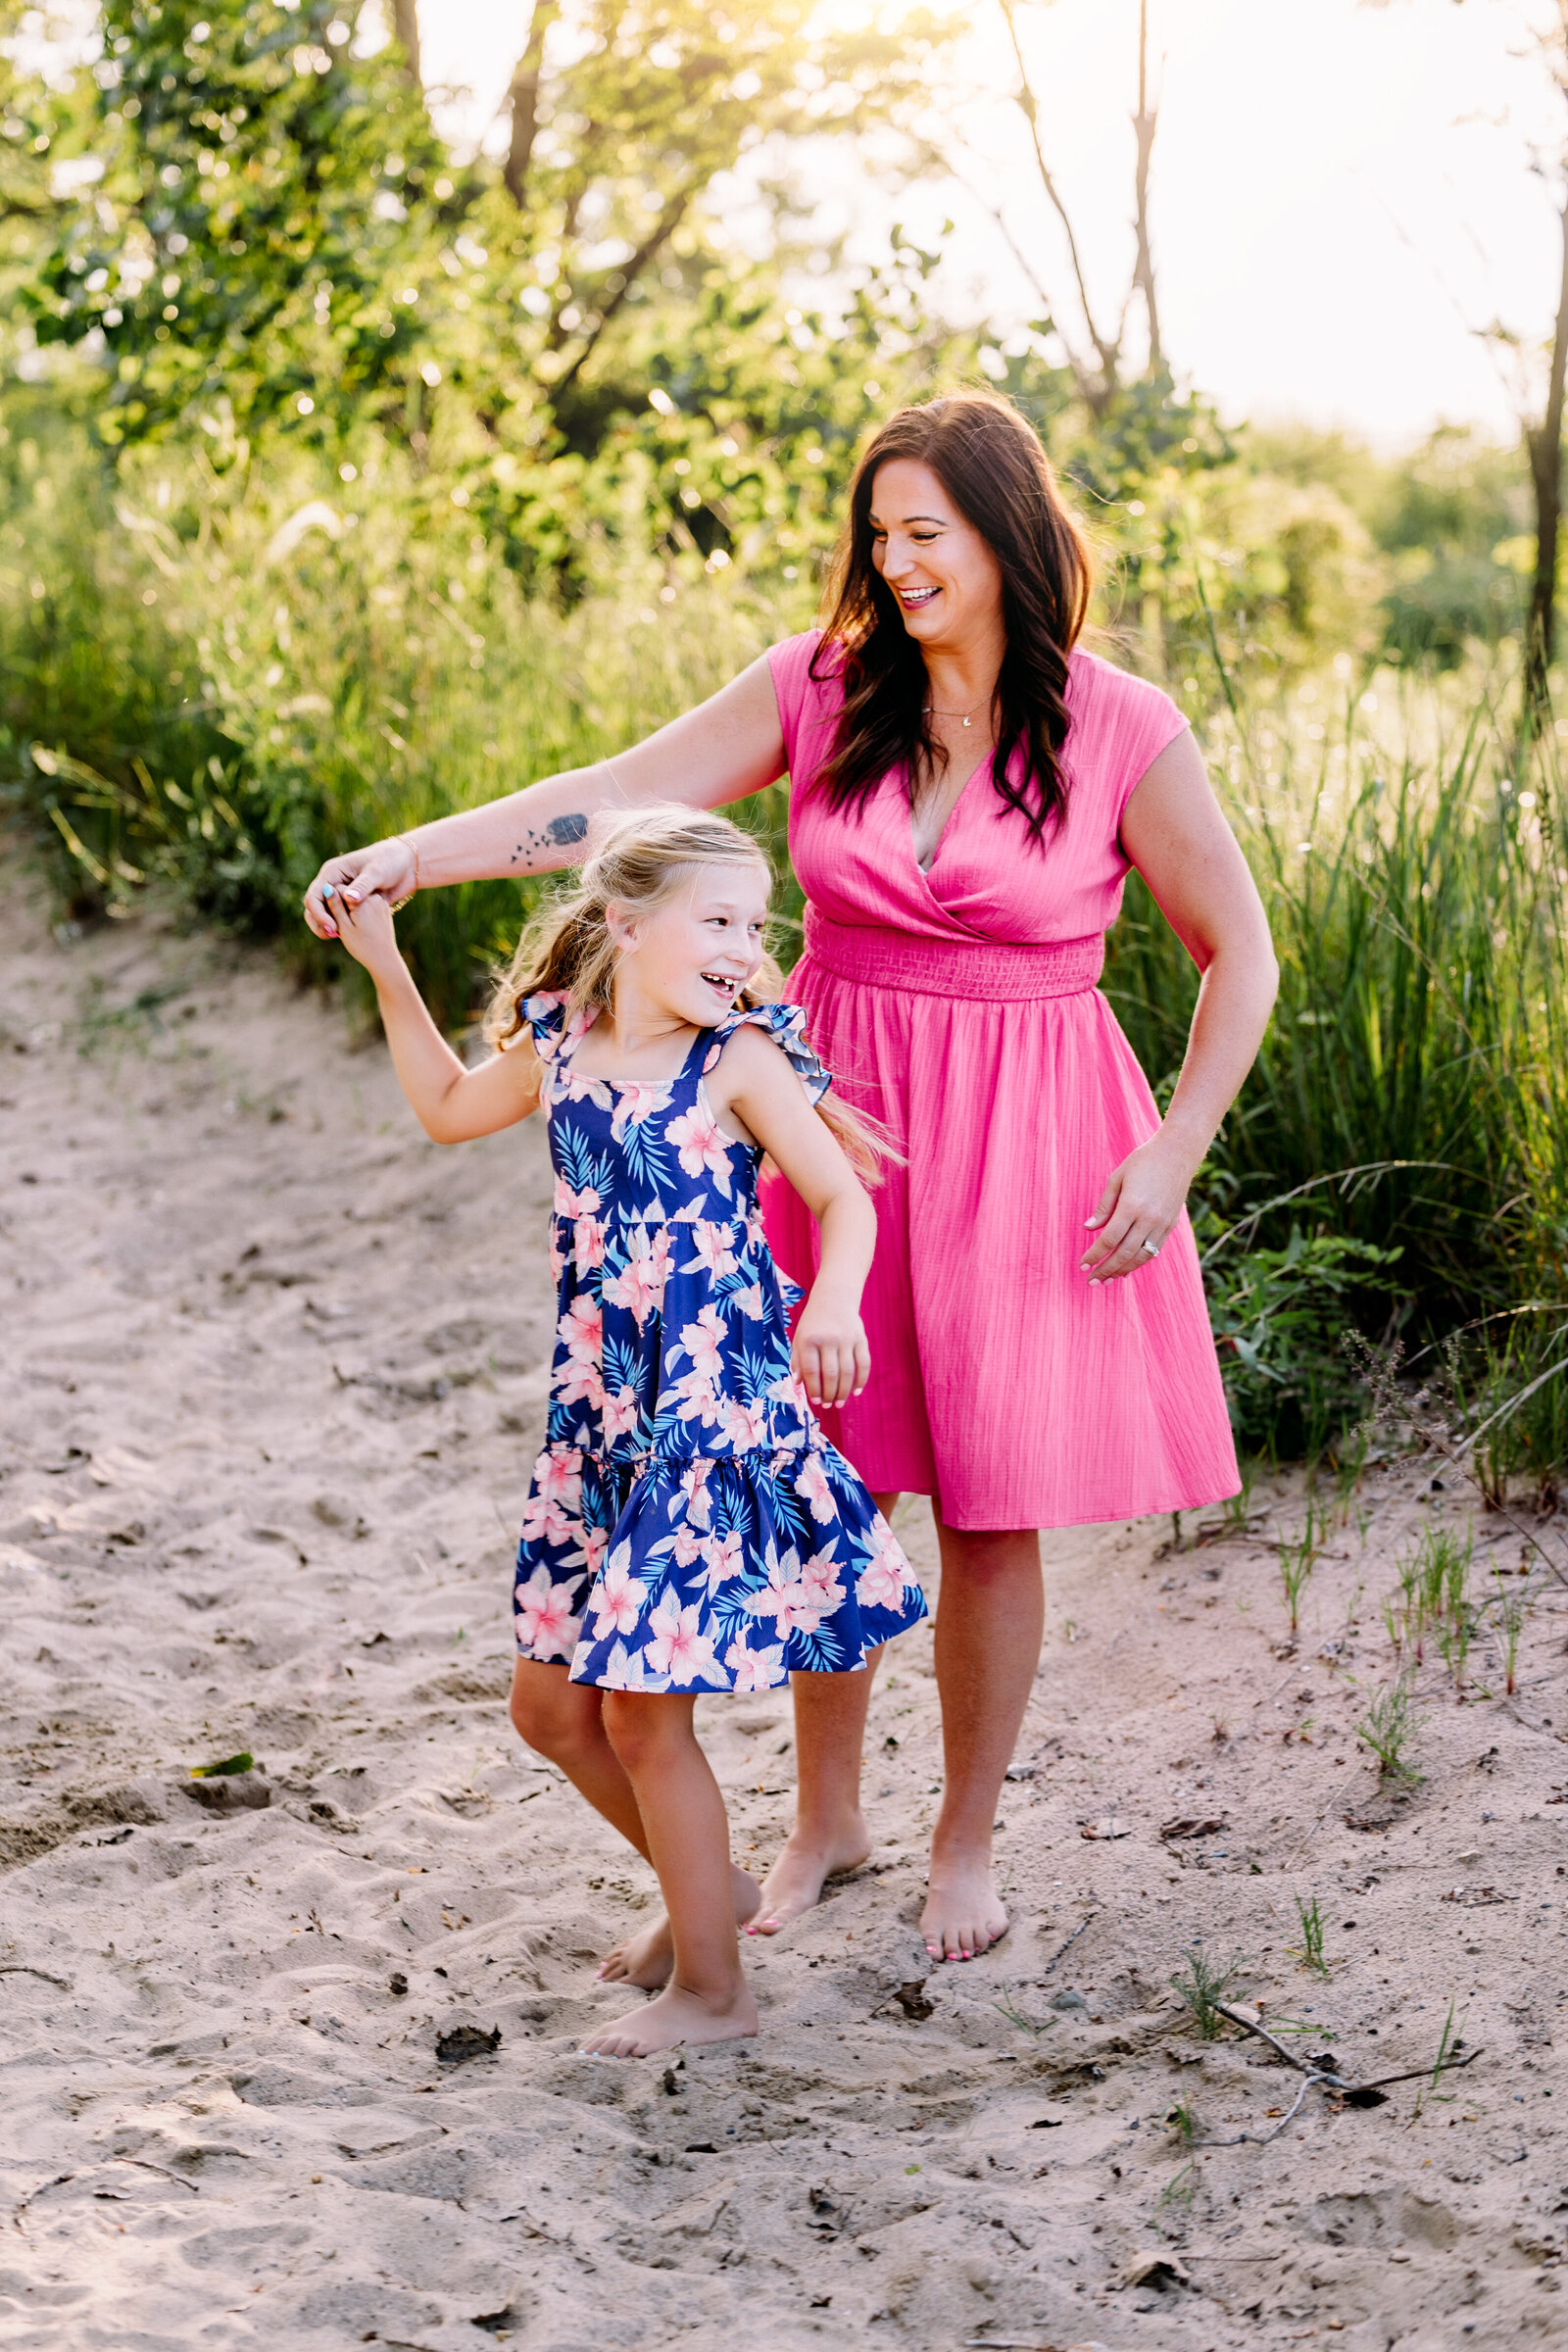 Mother dances wither her daughter on a path lined with tall grasses